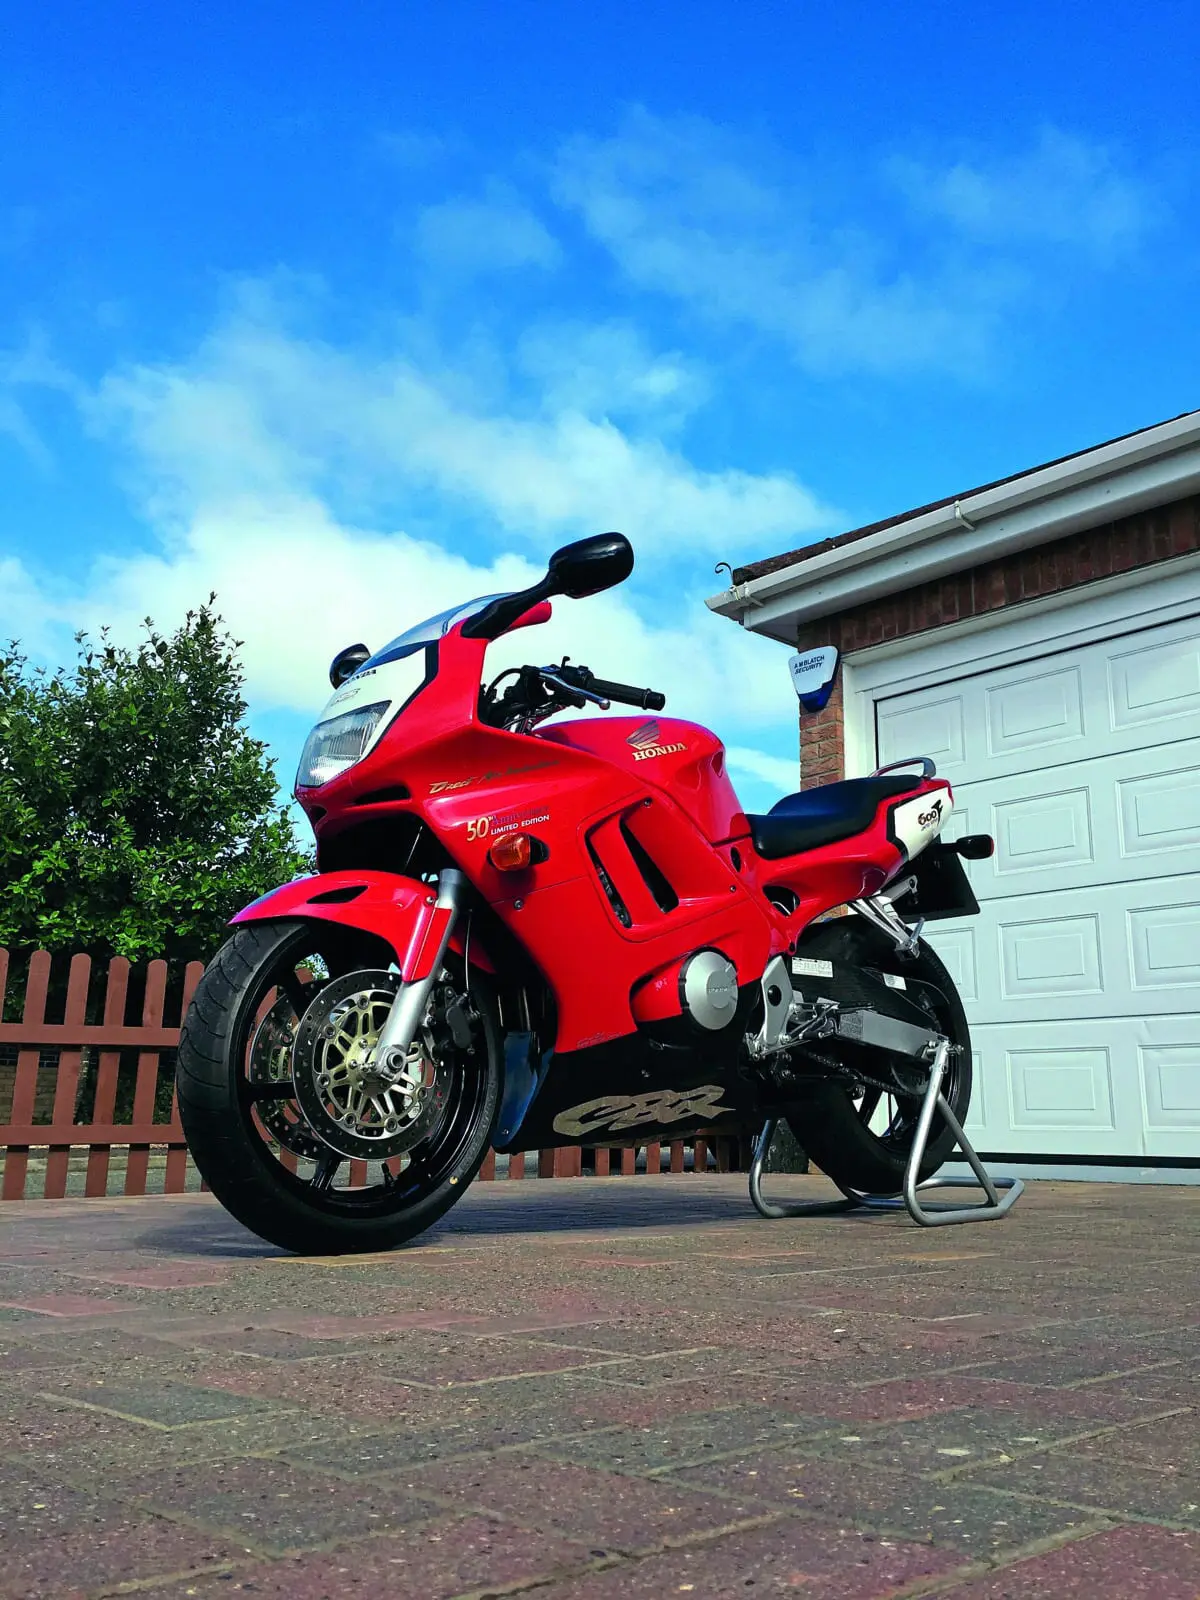 Show Us Yours: Neil and Jack’s 1998 Honda CBR600F